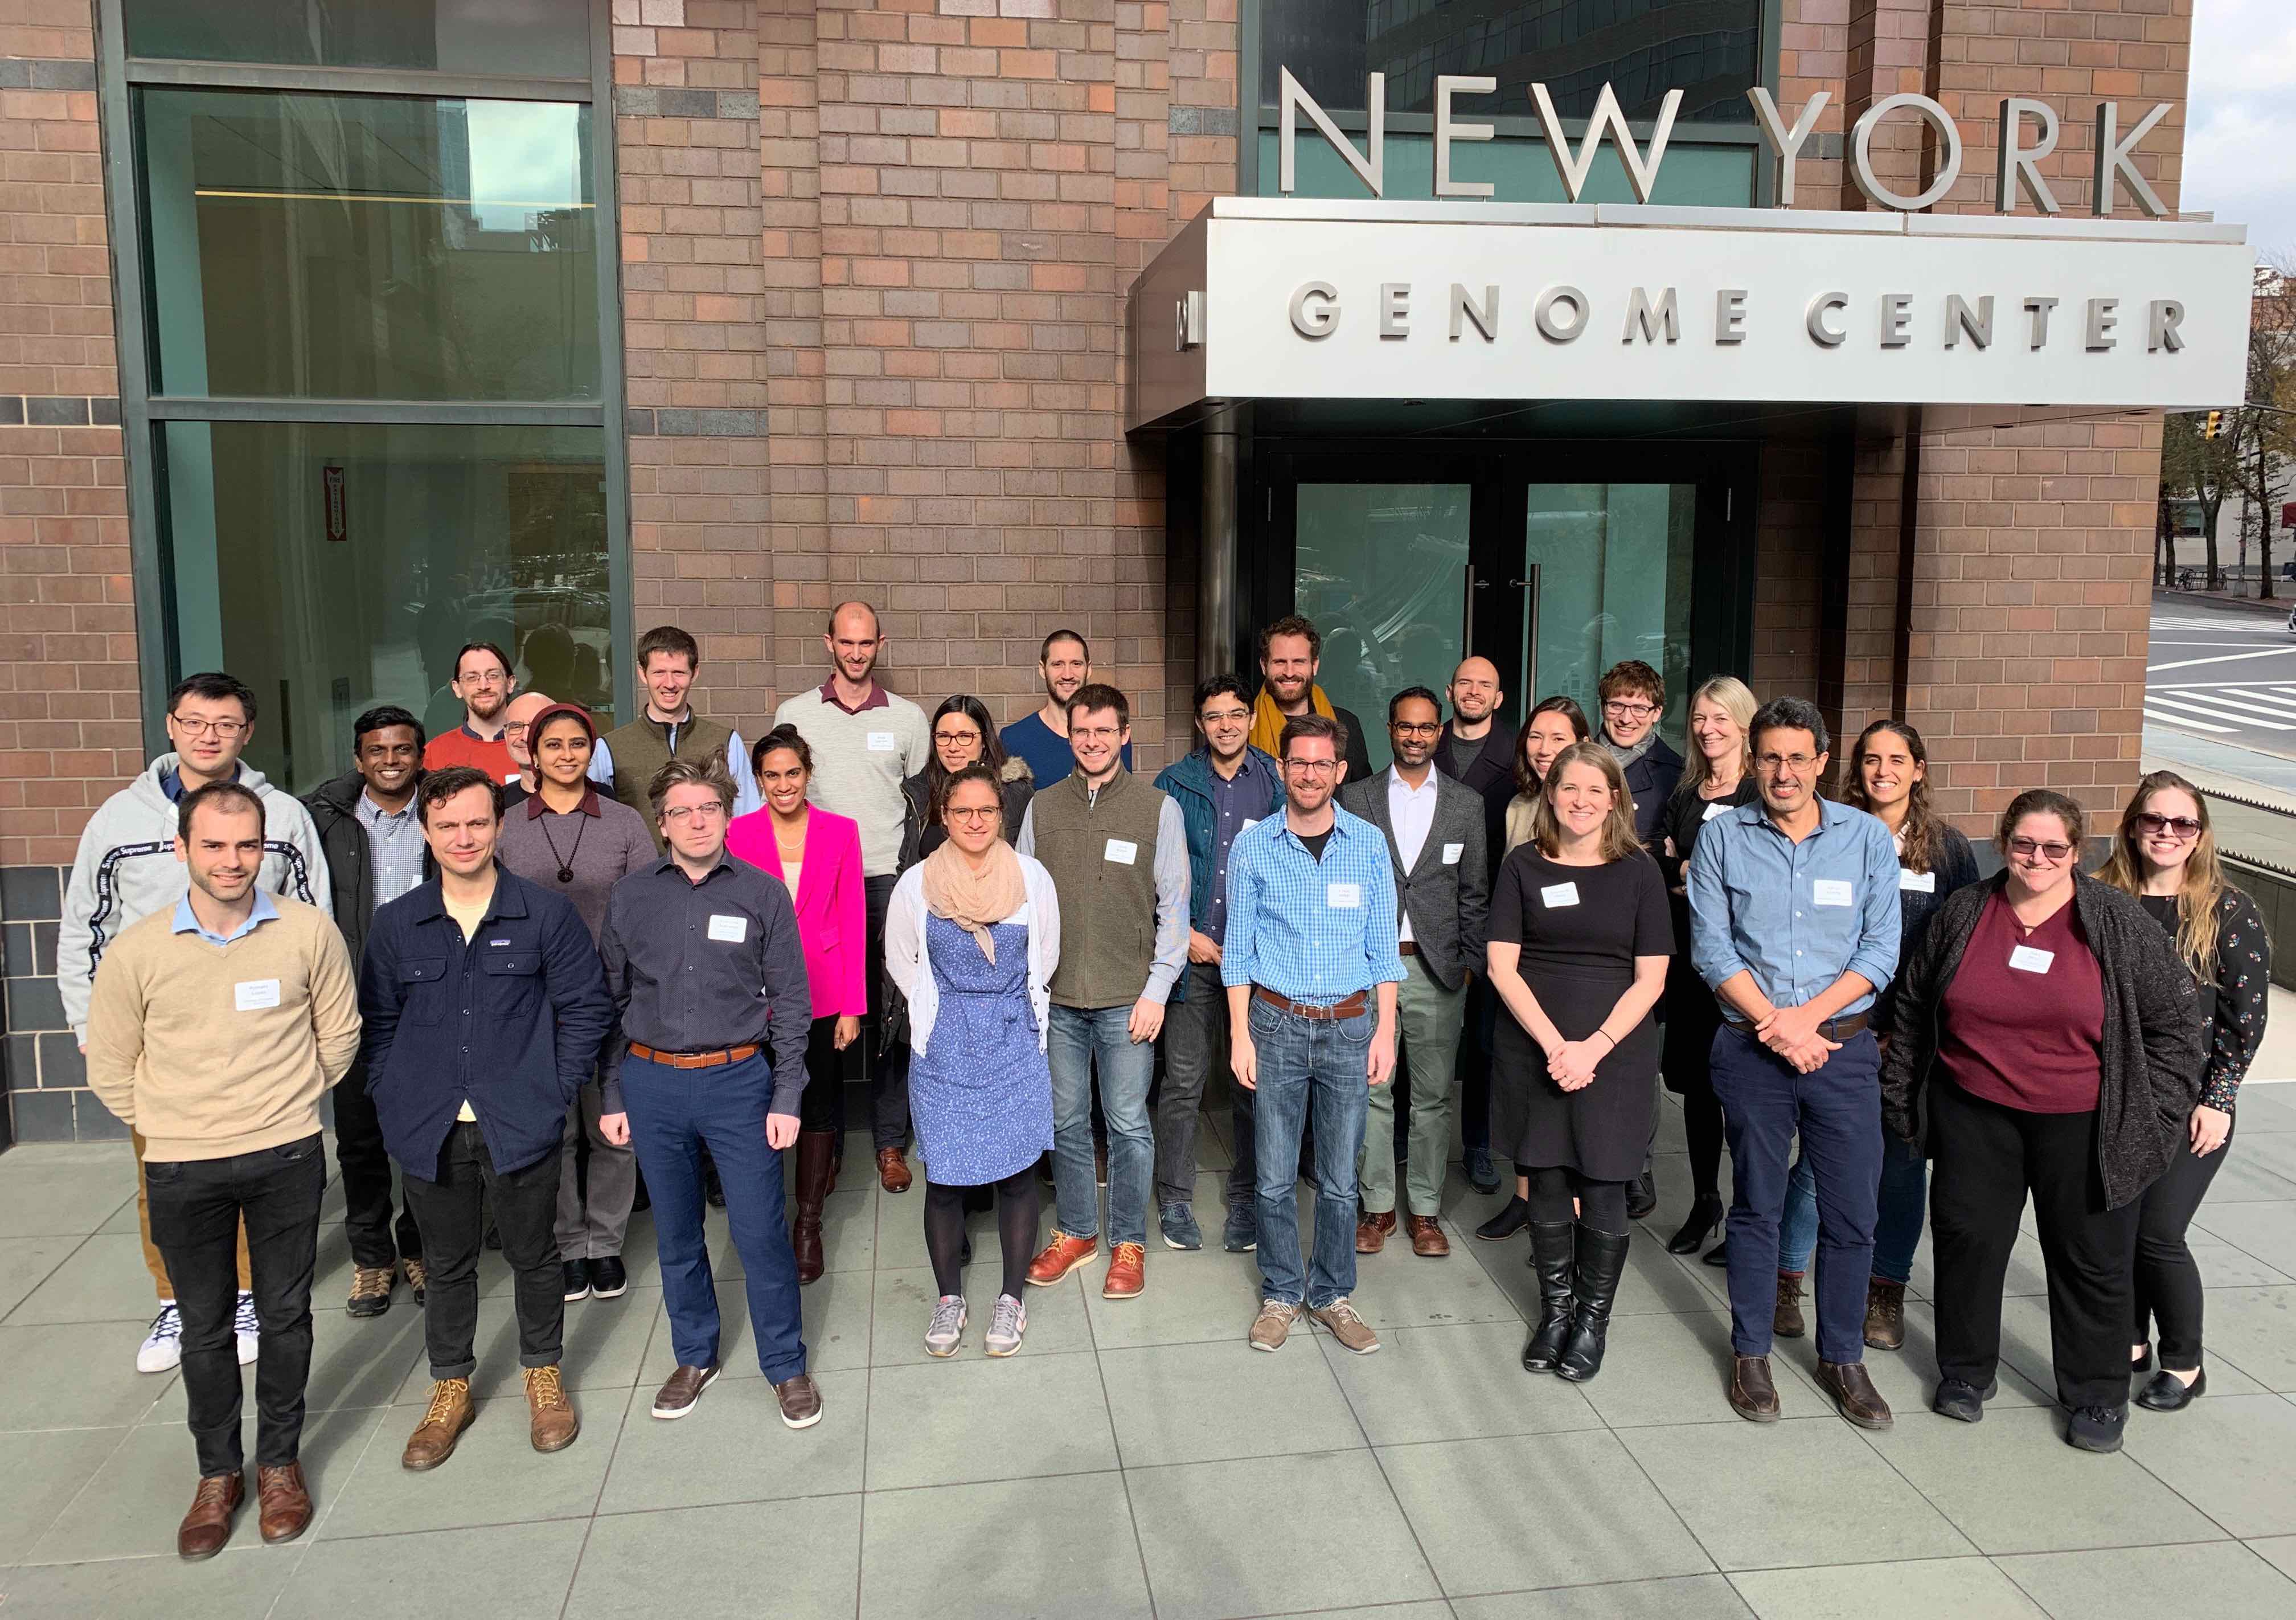 A group of attendees at the normjam workshop pose for a photo outside a building sign that reads New York Genome Center.